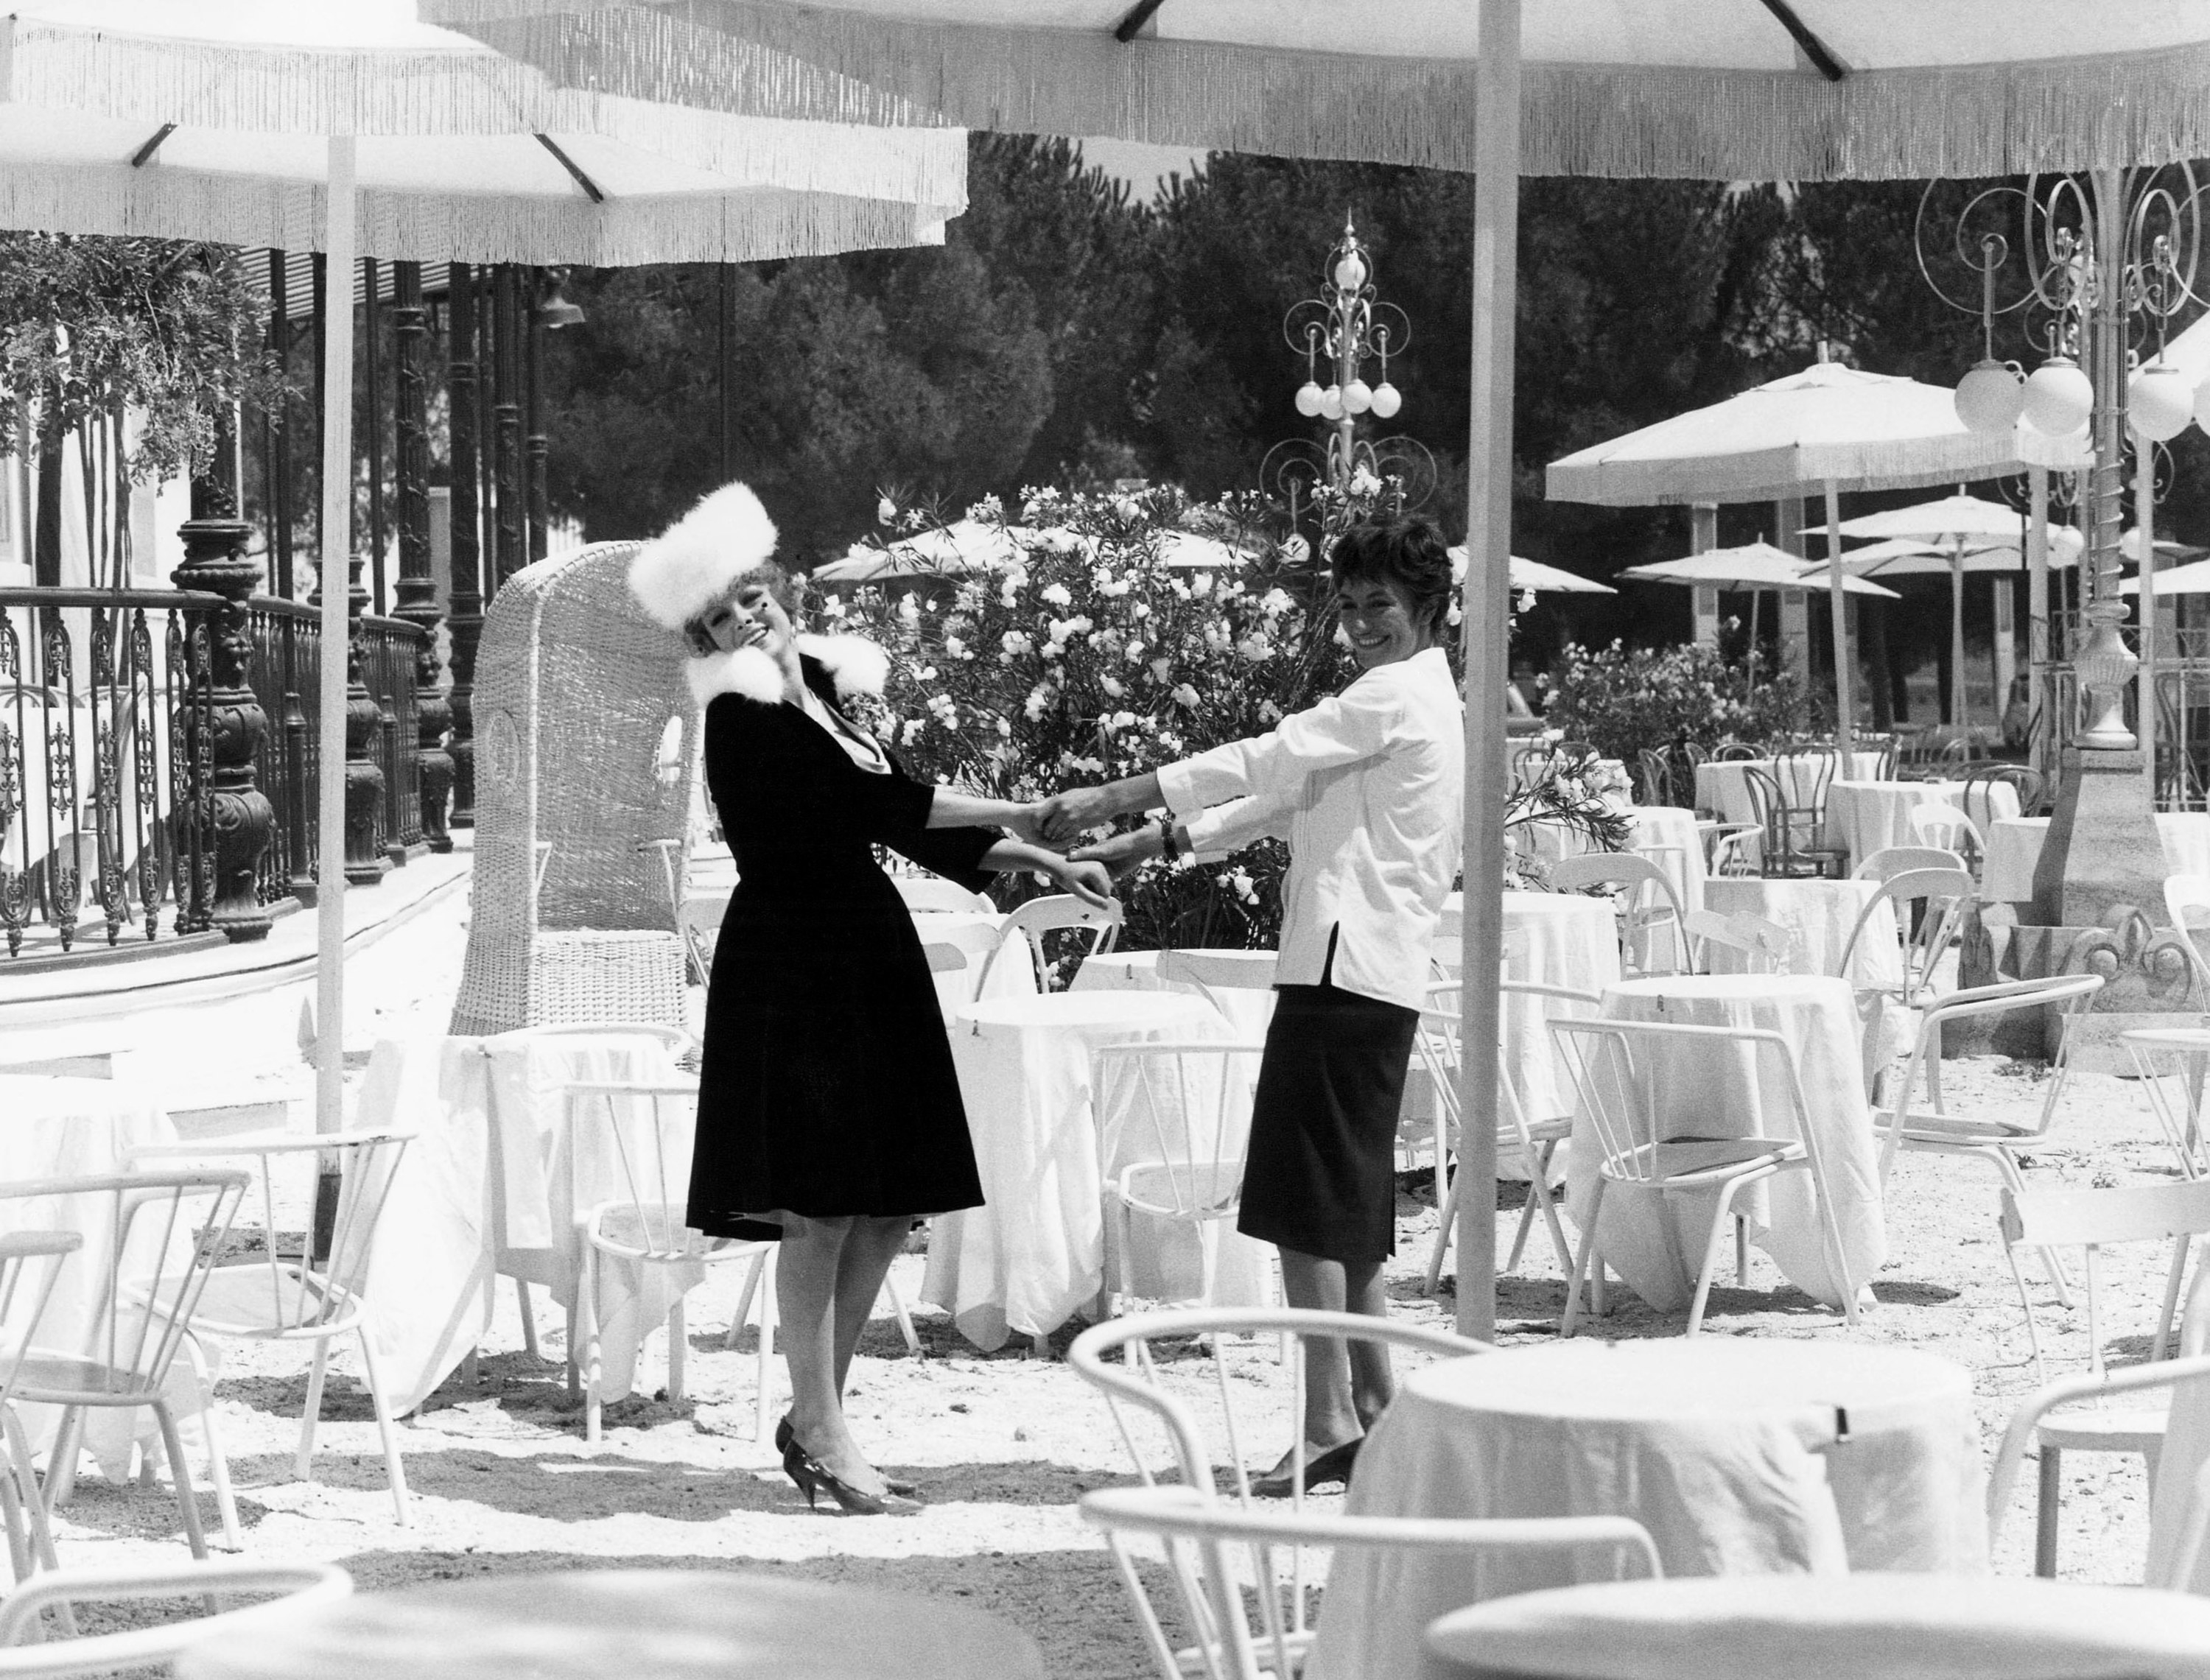 Black and white: Two women in stylish outfits standing with arms stretched toward one another, holding hands at a beautiful outdoor dining area with tables, chairs, and fringed umbrellas, still from 8 1/2